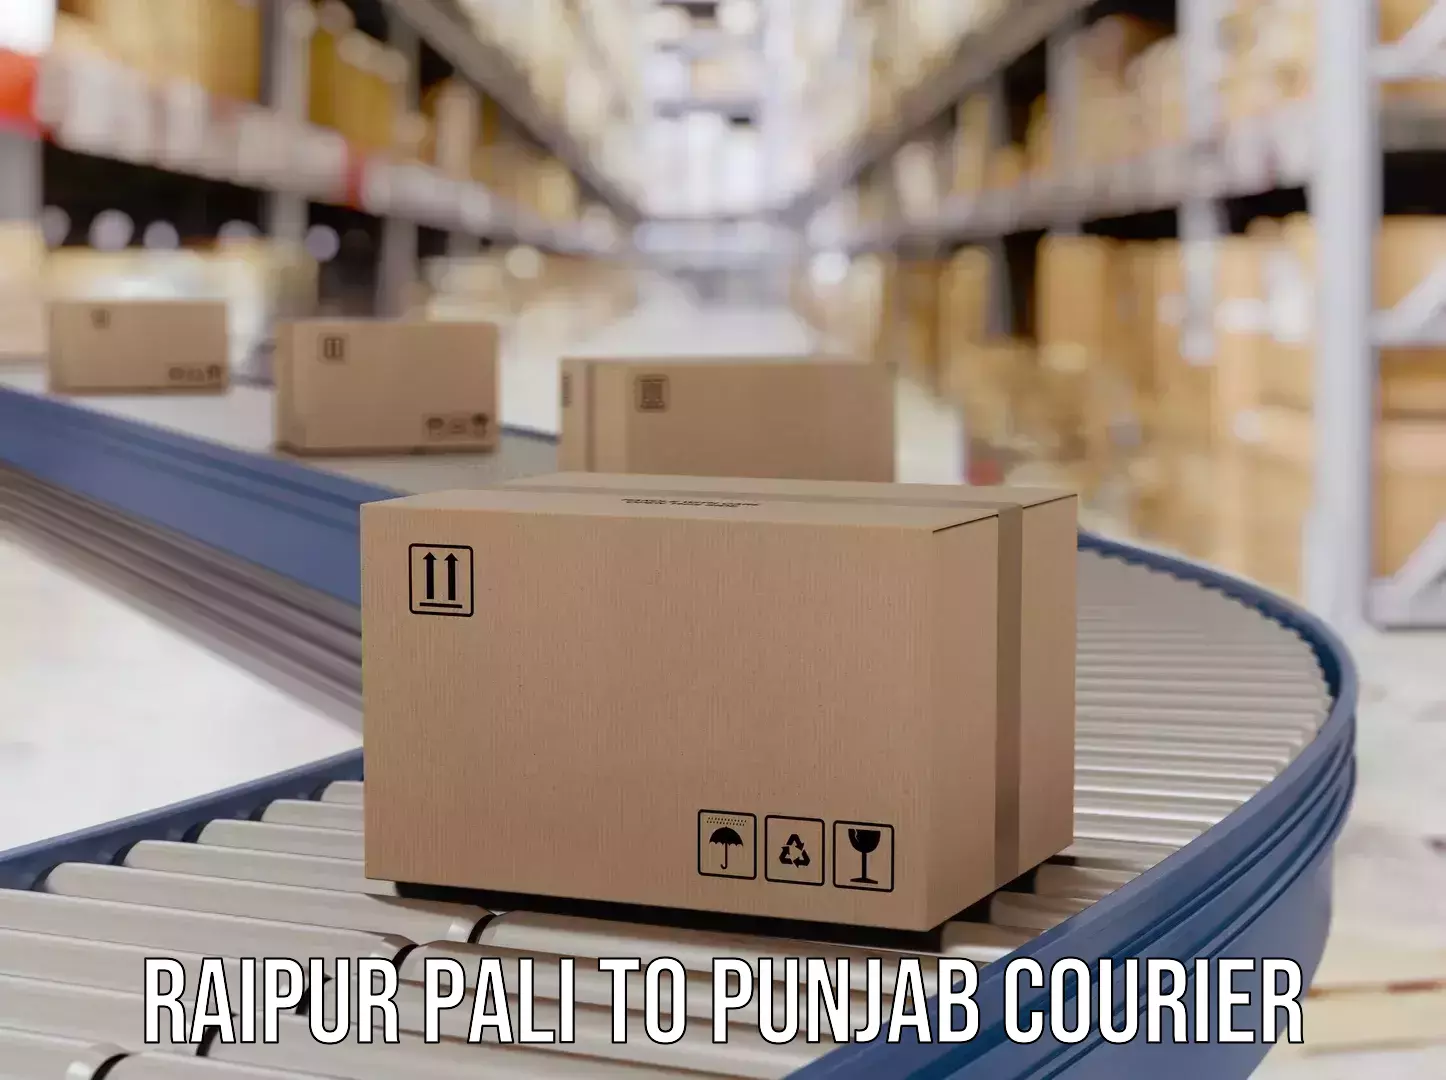 Parcel delivery automation Raipur Pali to Faridkot